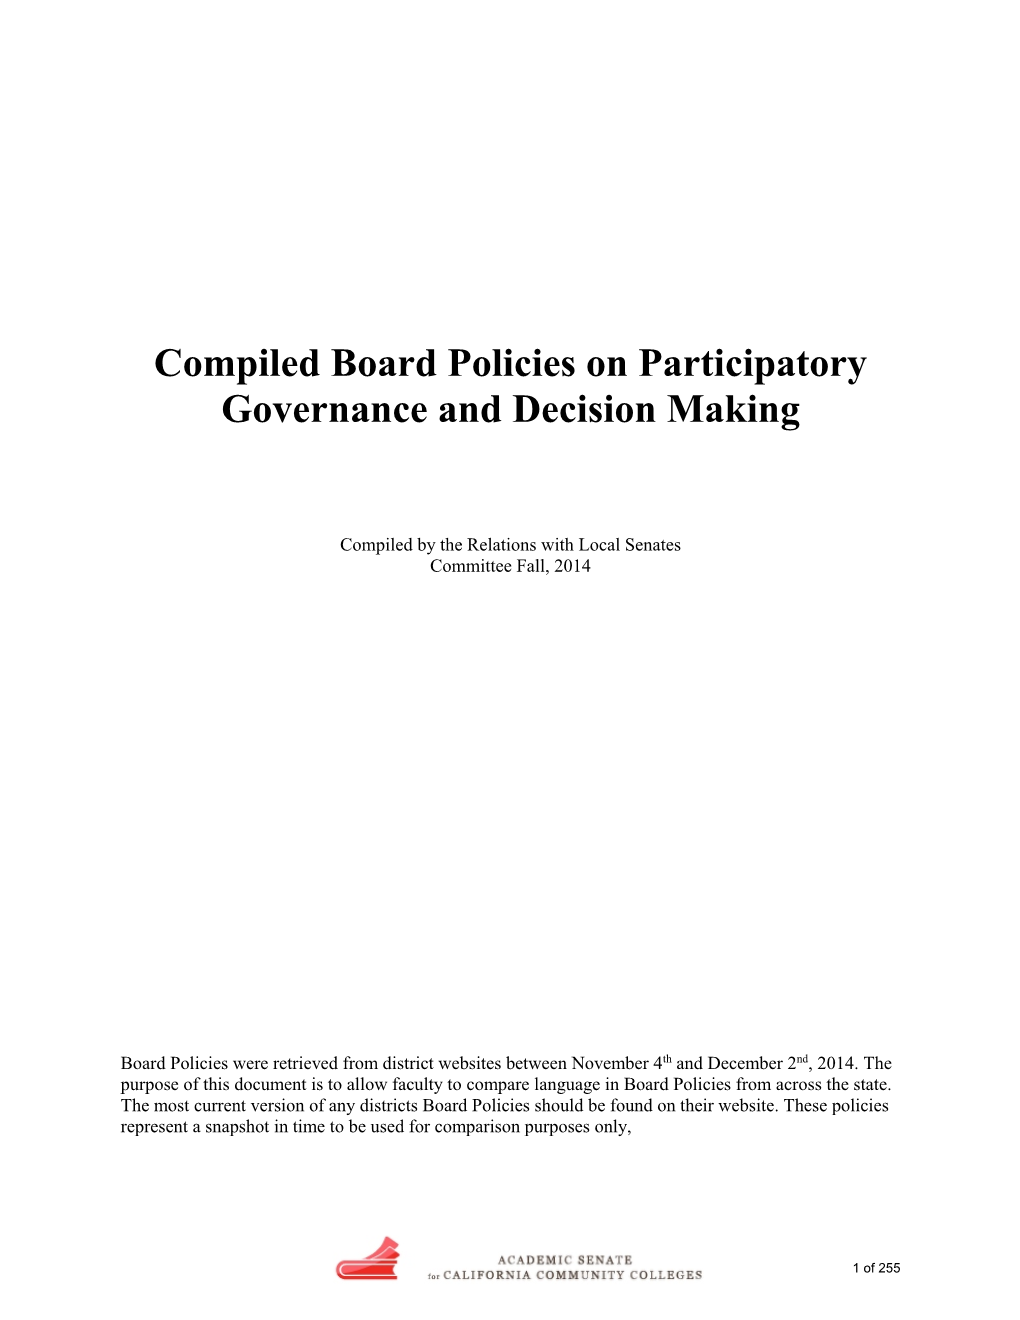 Board Policies on Participatory Governance and Decision Making